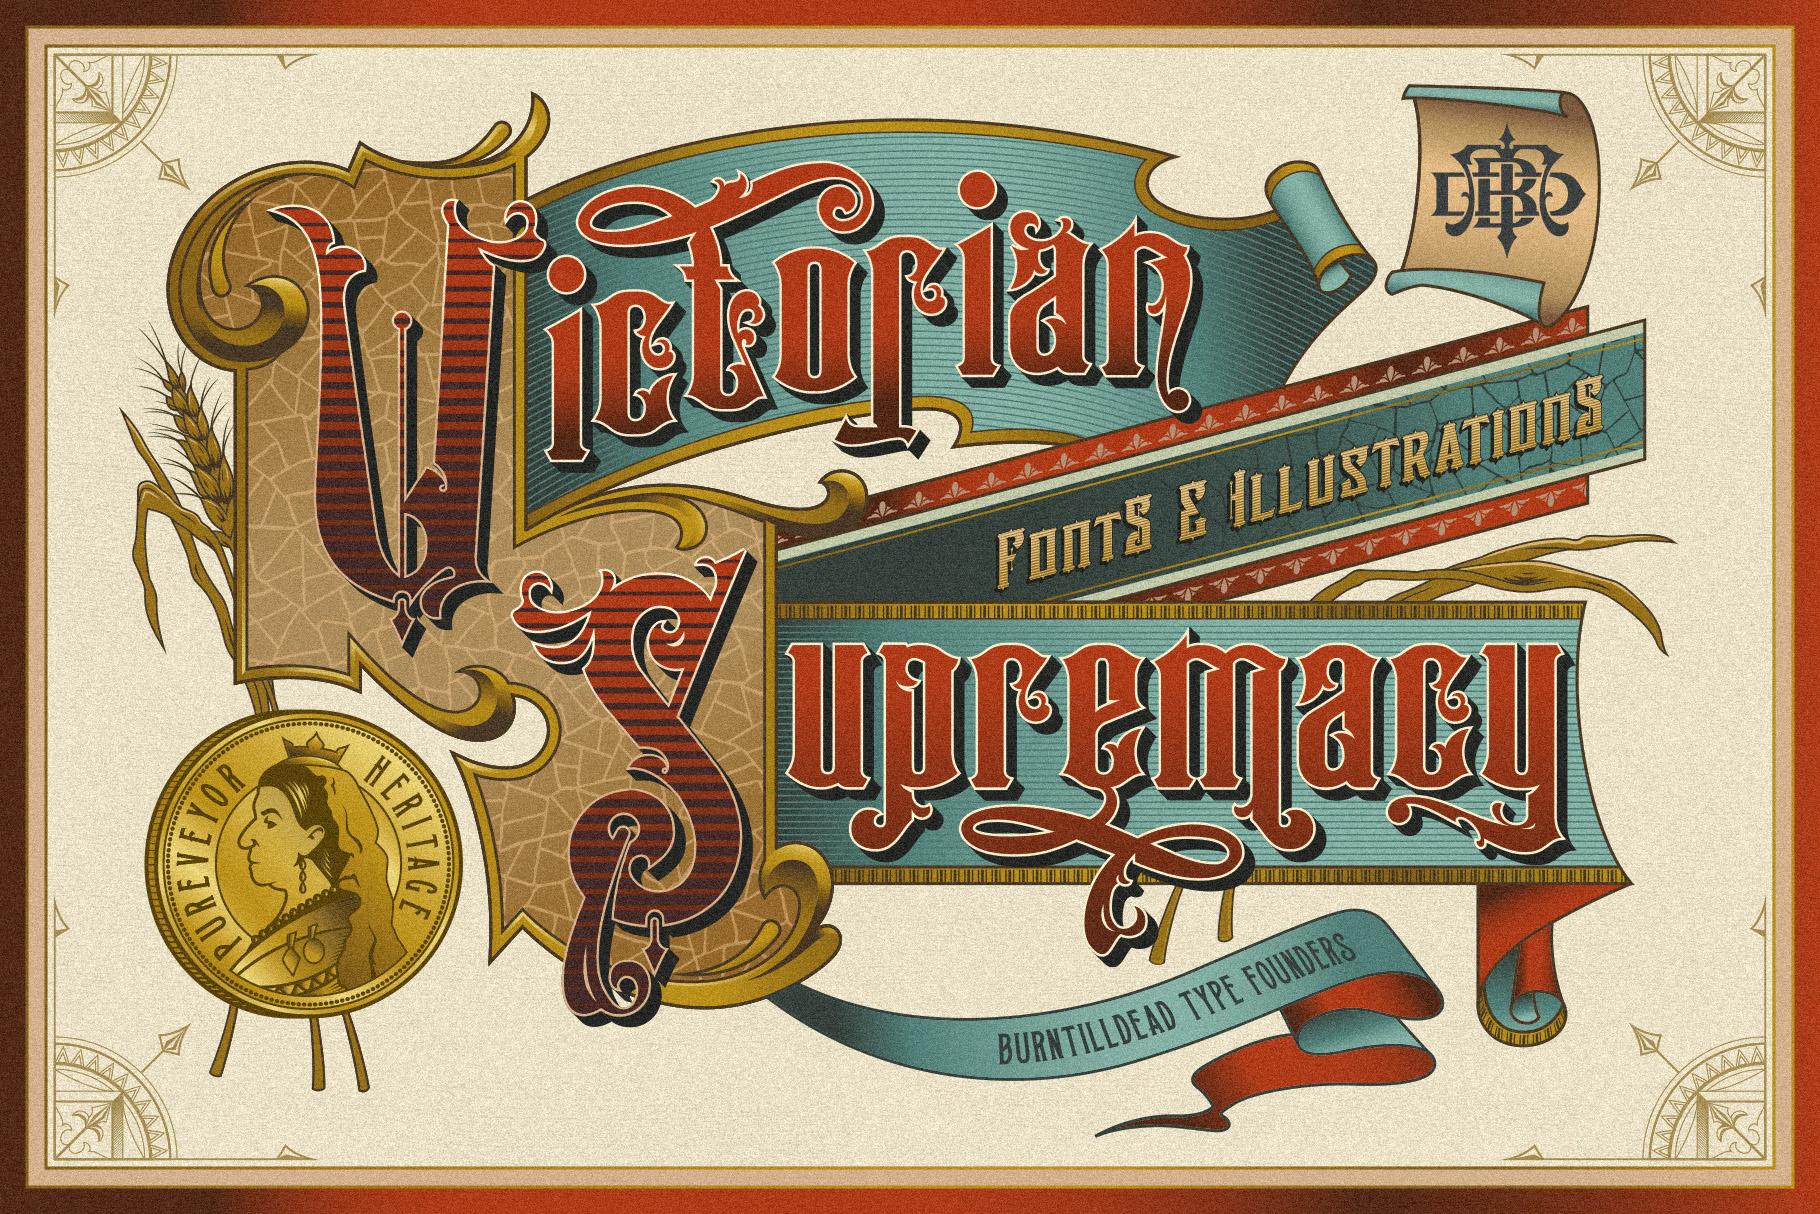 Victorian Supremacy Font